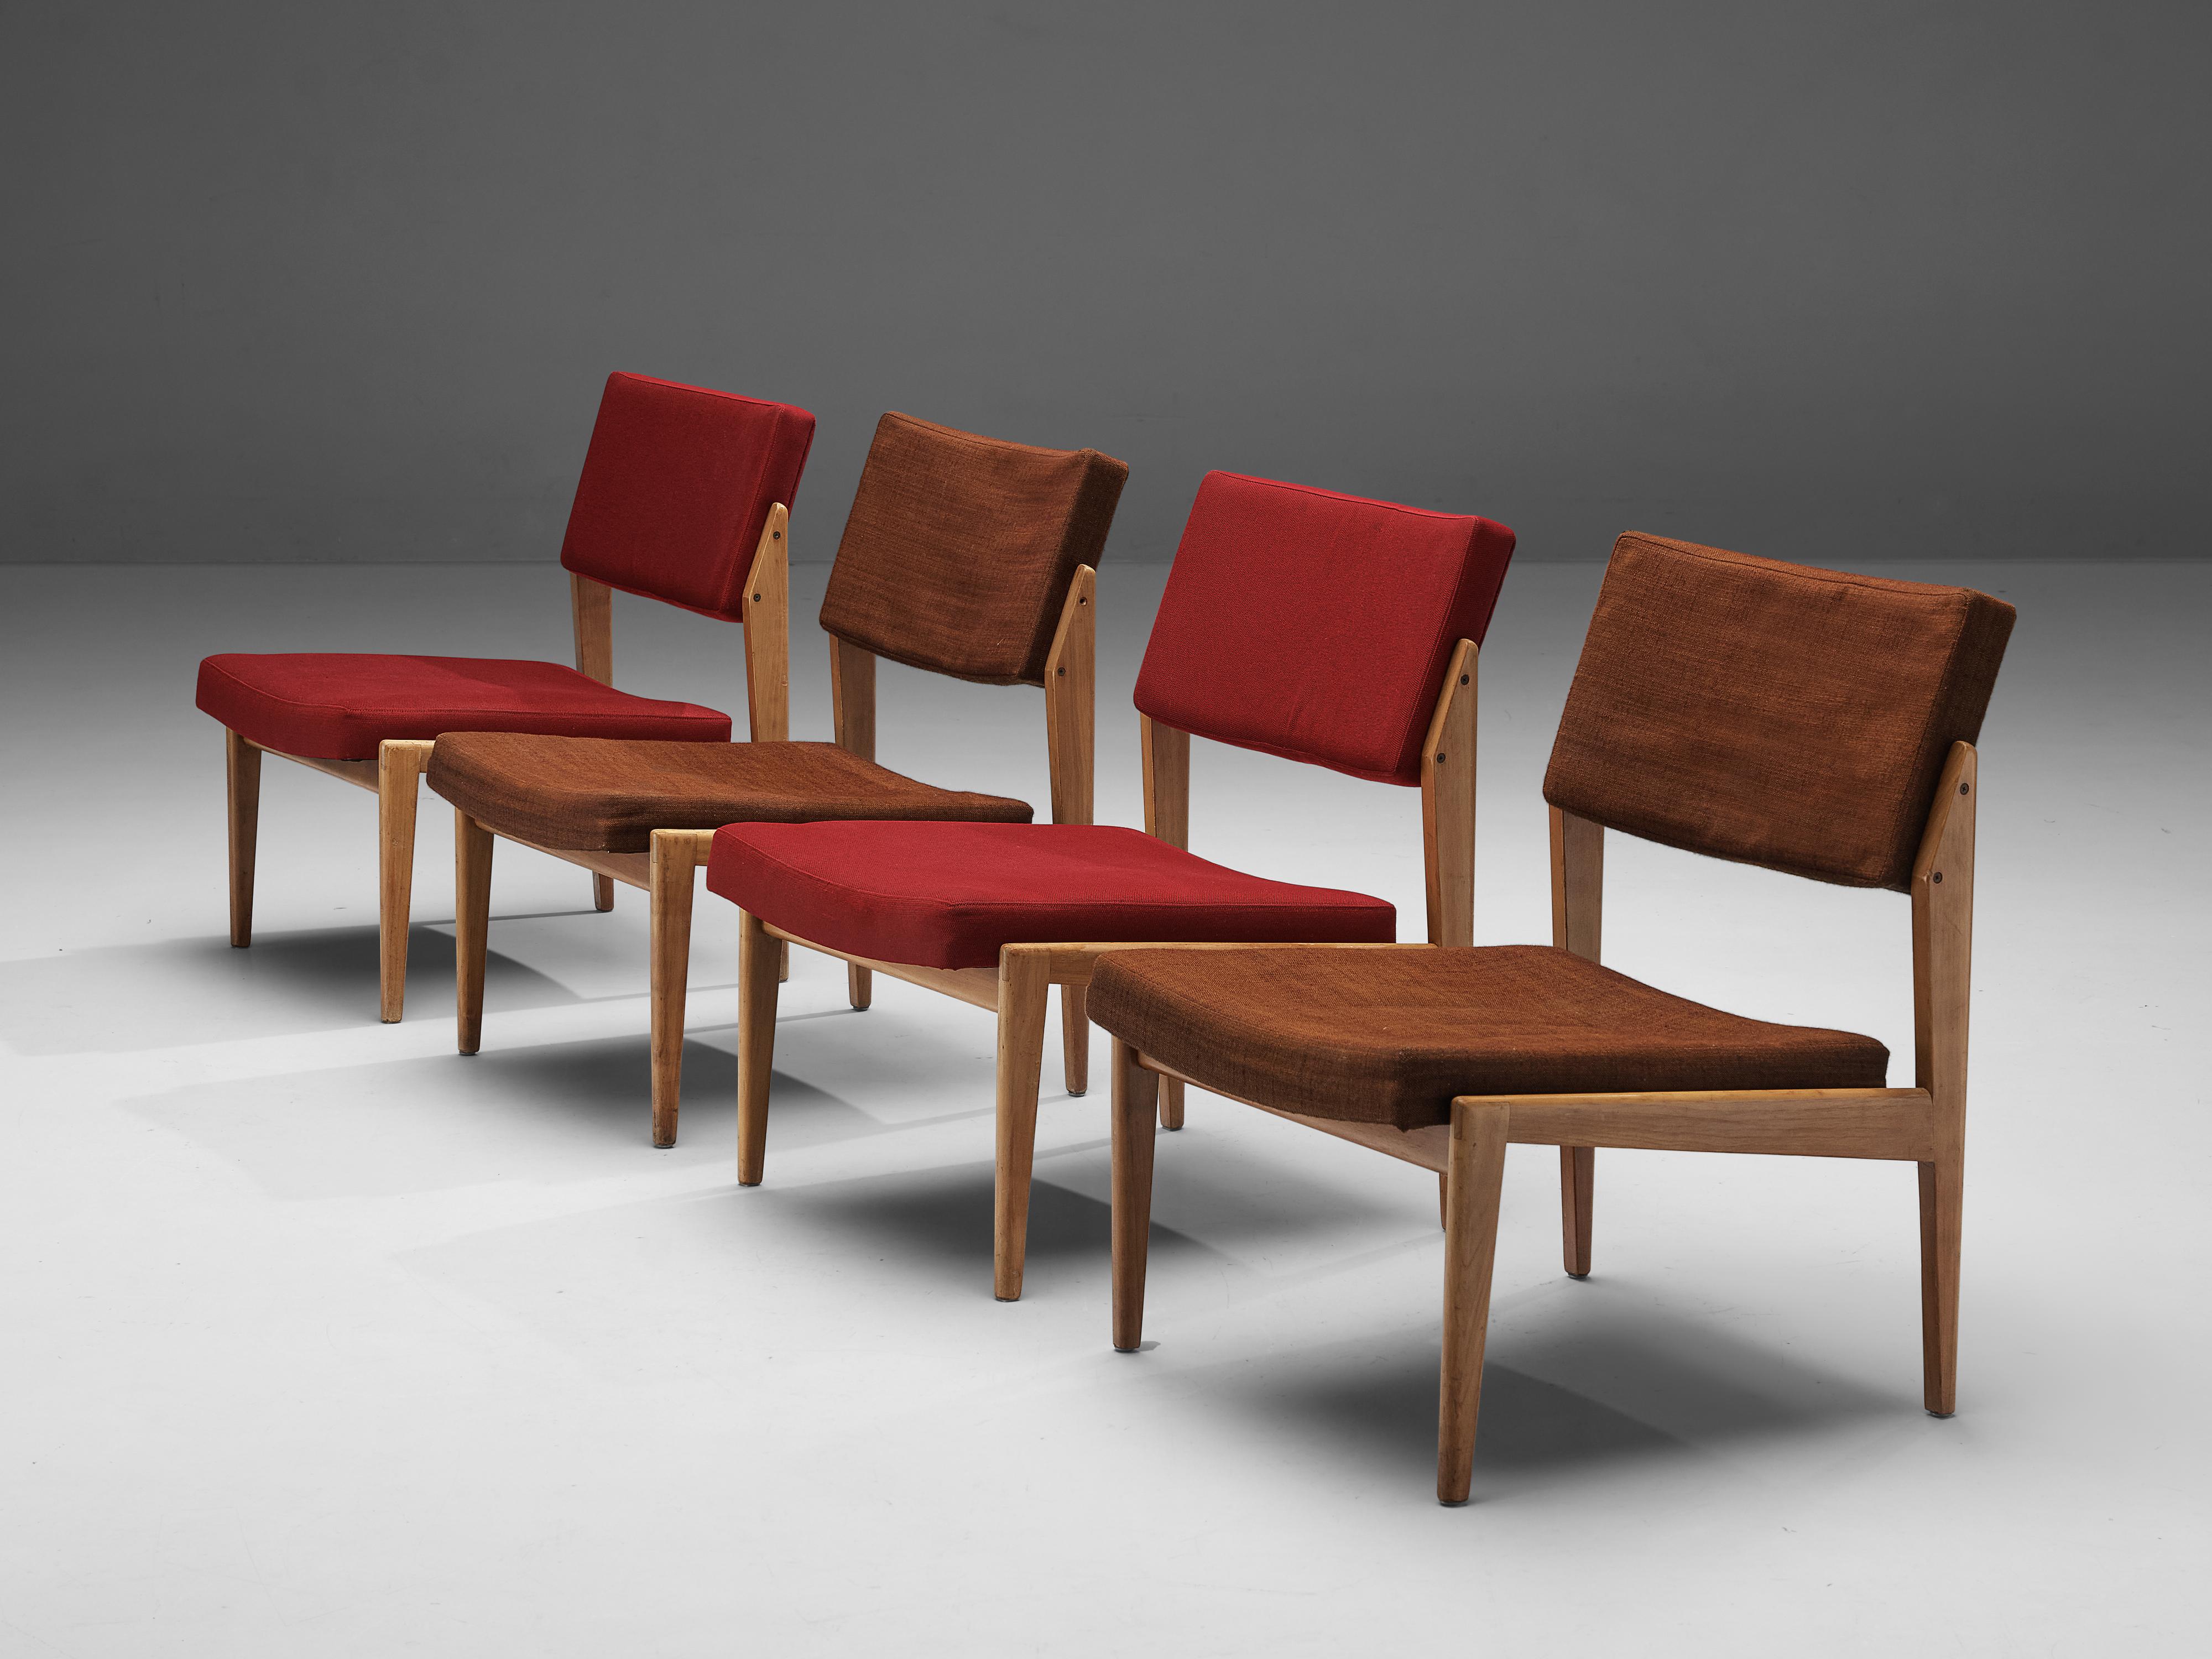 Thonet, set of four lounge chairs, cherry, fabric, Germany, 1930s

This unique set of four chairs has a splendid construction that epitomizes a simplistic, natural and timeless aesthetics. The design is characterized by clear, straight lines that